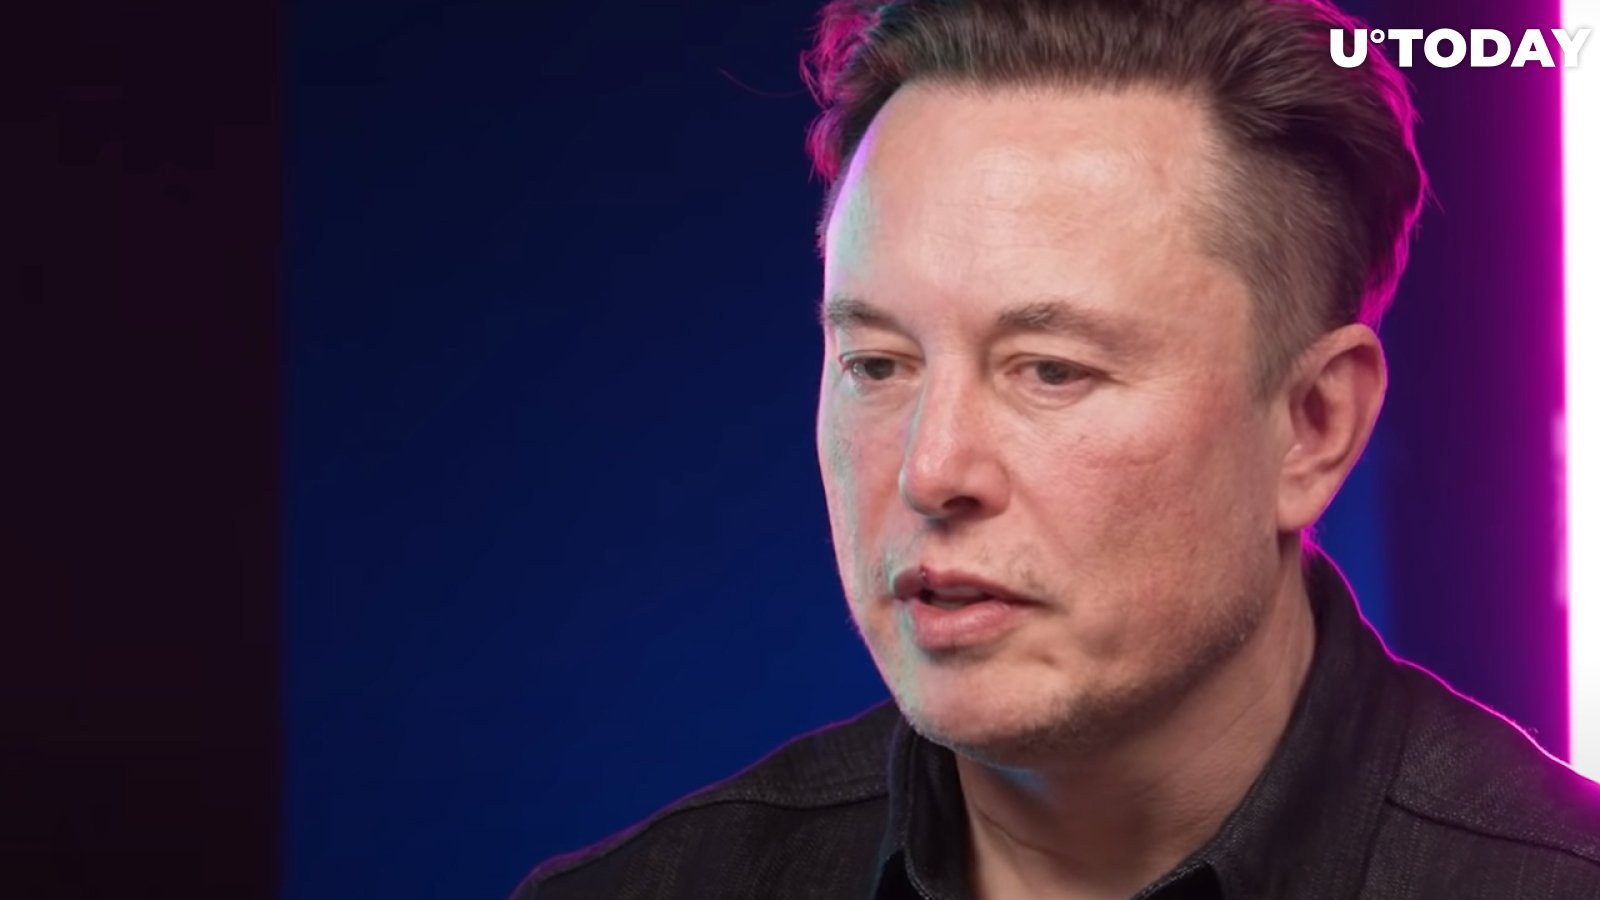 Elon Musk-Driven Dogecoin Price Spike Lasts 23 Seconds